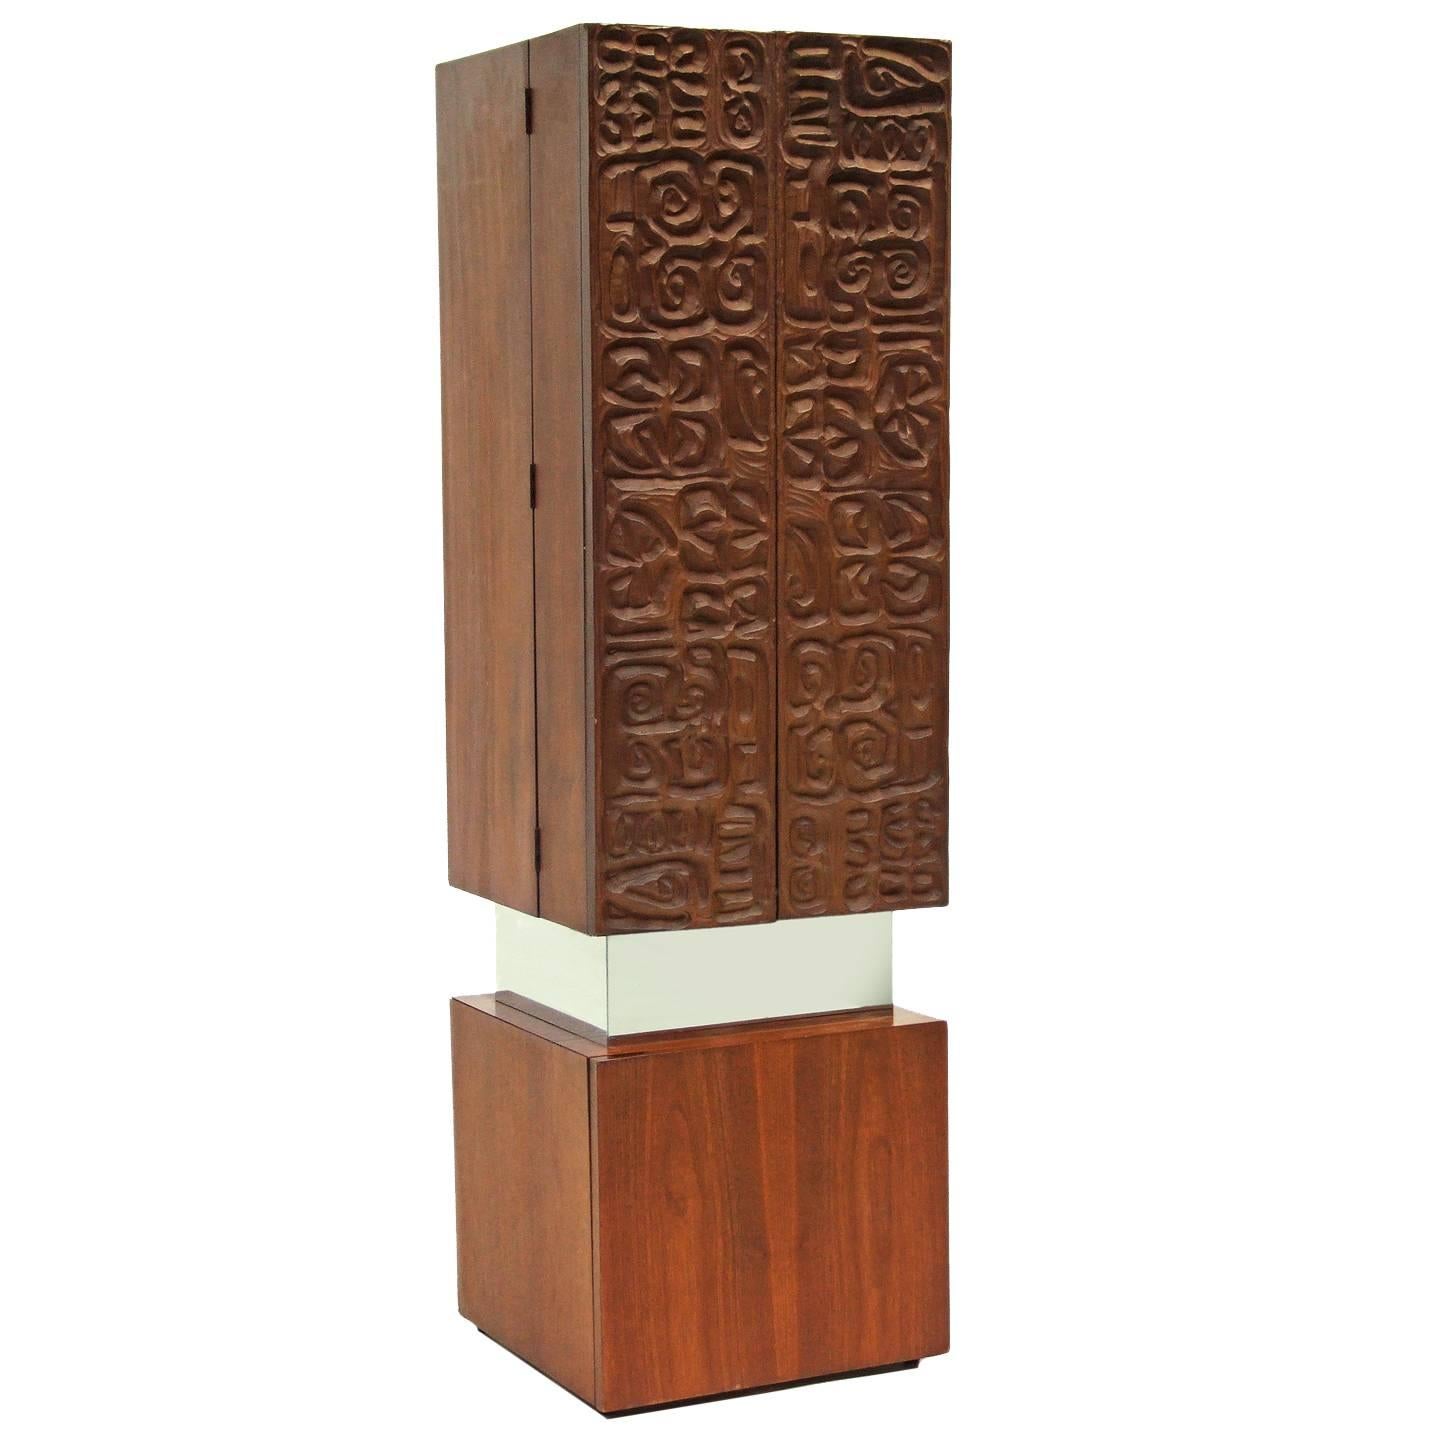 1970s Brutalist Cabinet with a Textured Relief and Chrome Trim